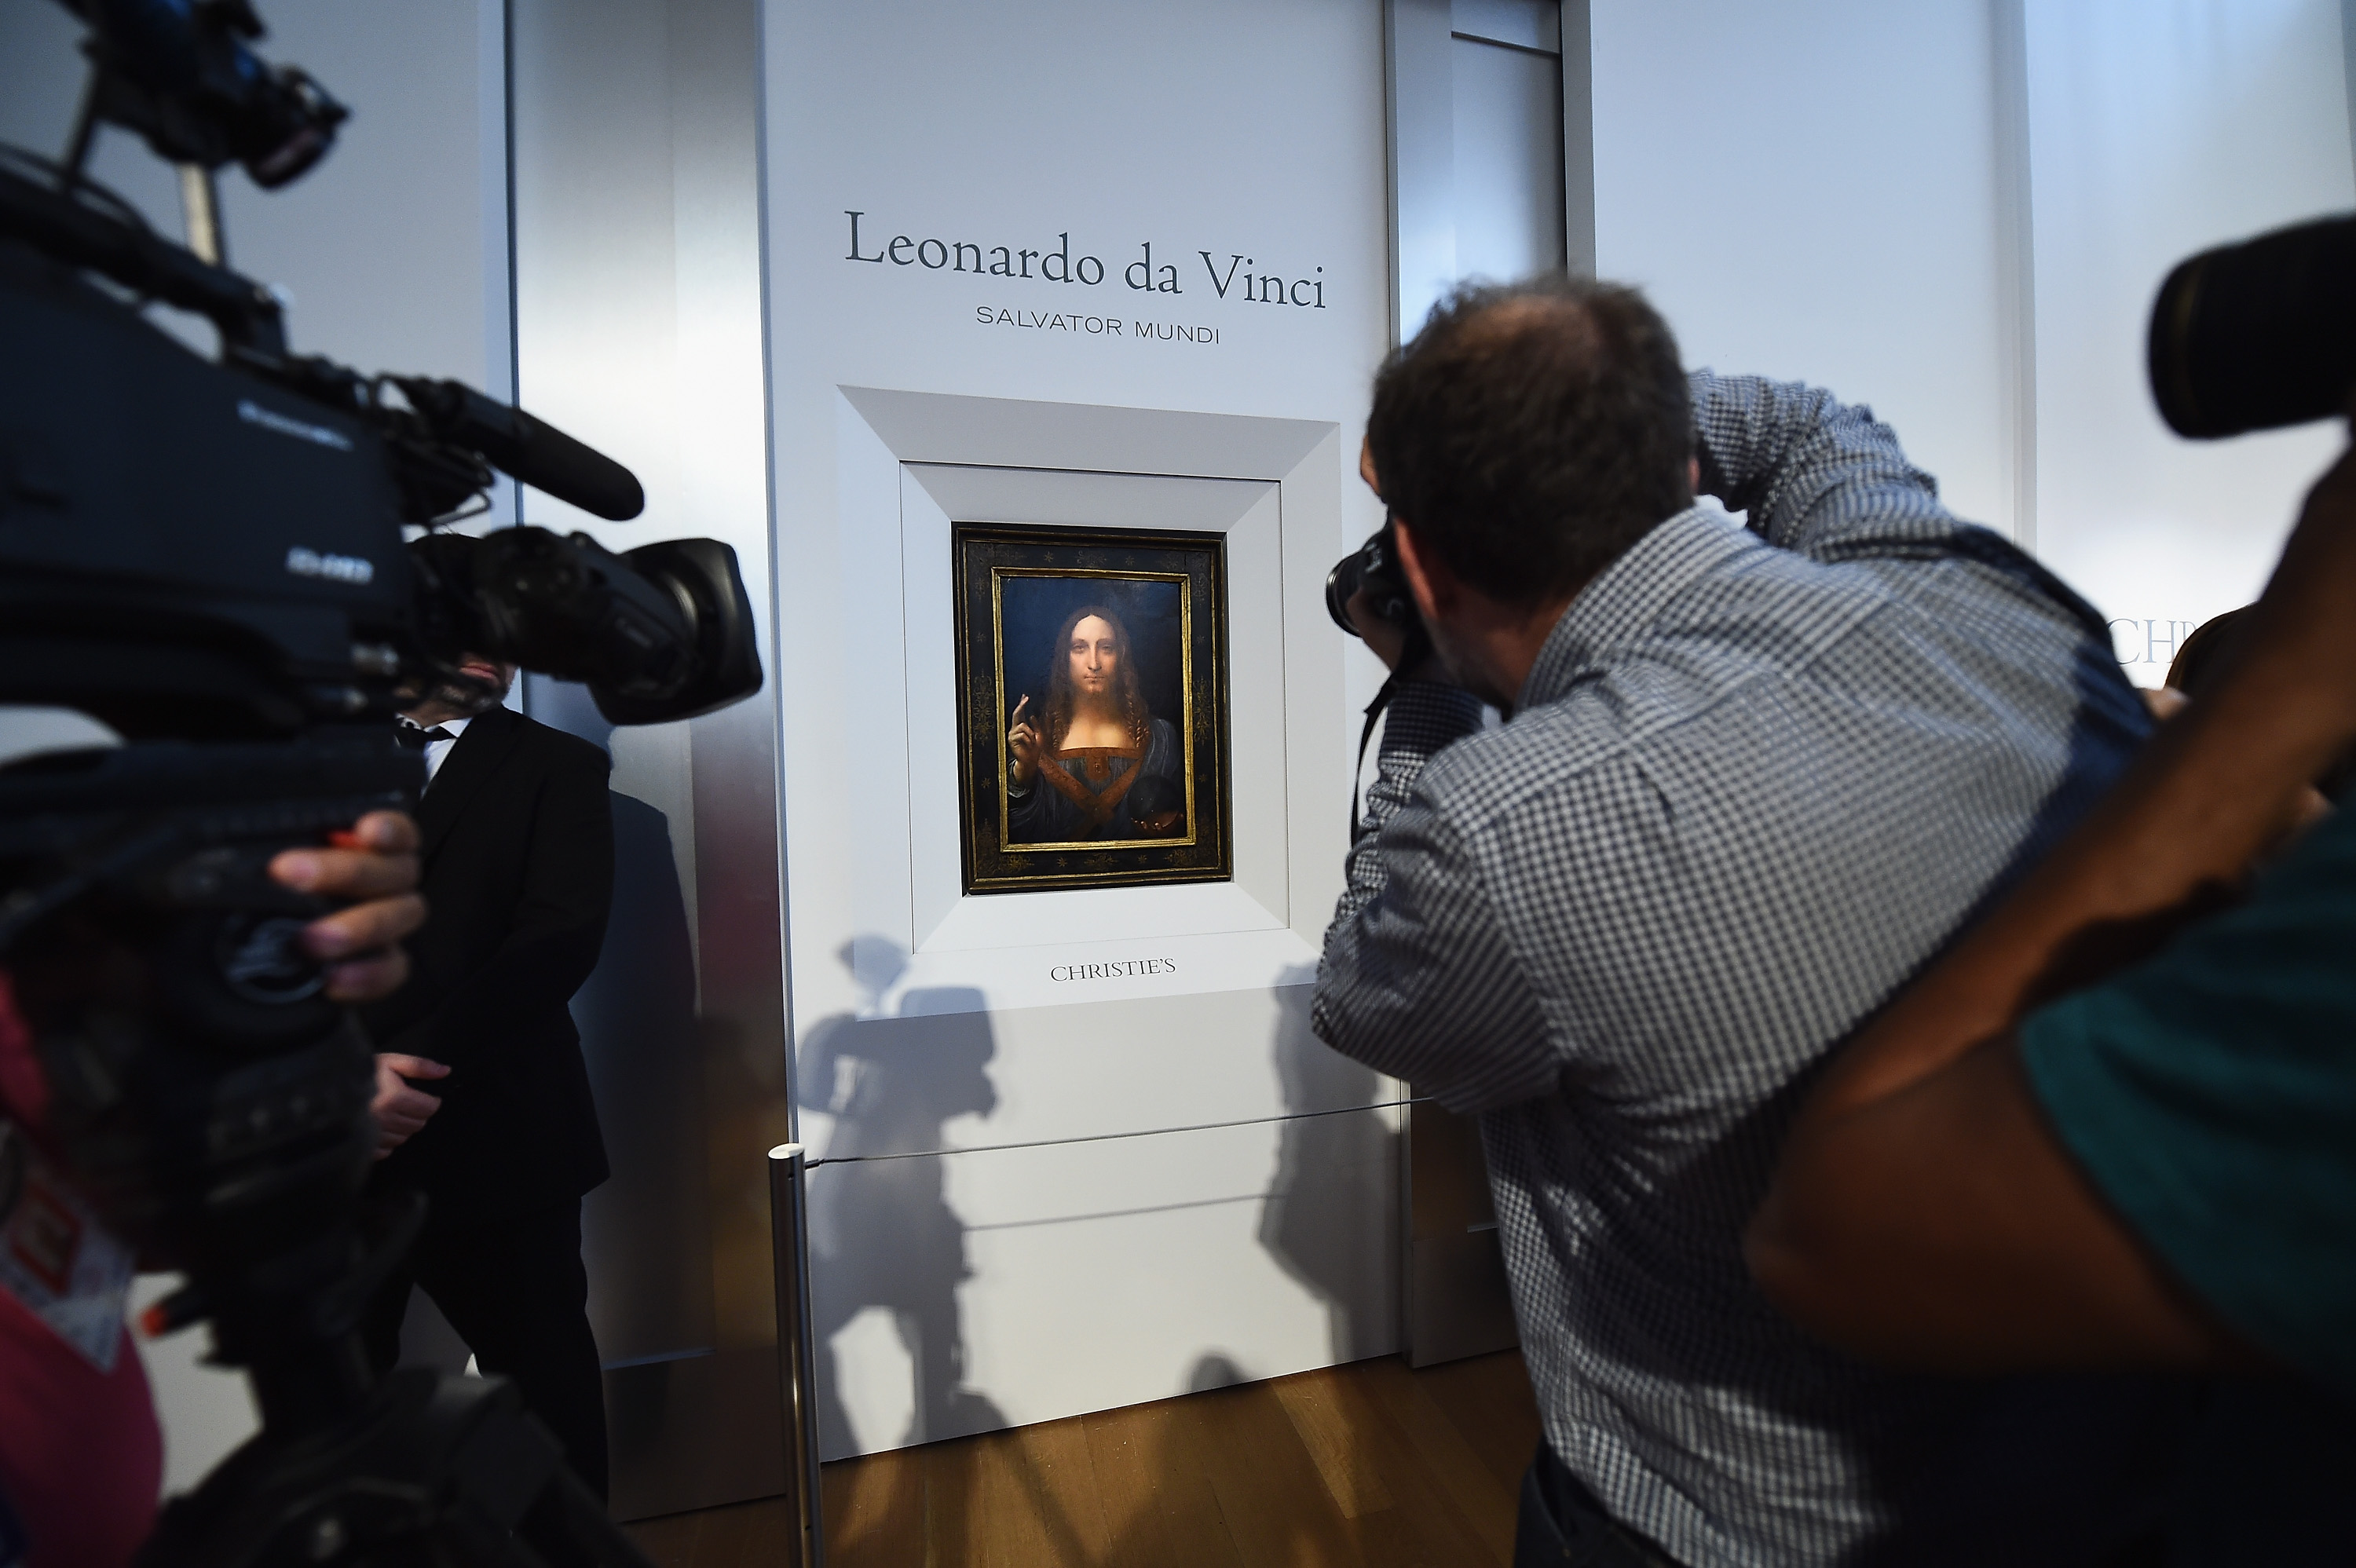 This Leonardo da Vinci Painting Once Sold for $60. Now It Could Go for $100 Million